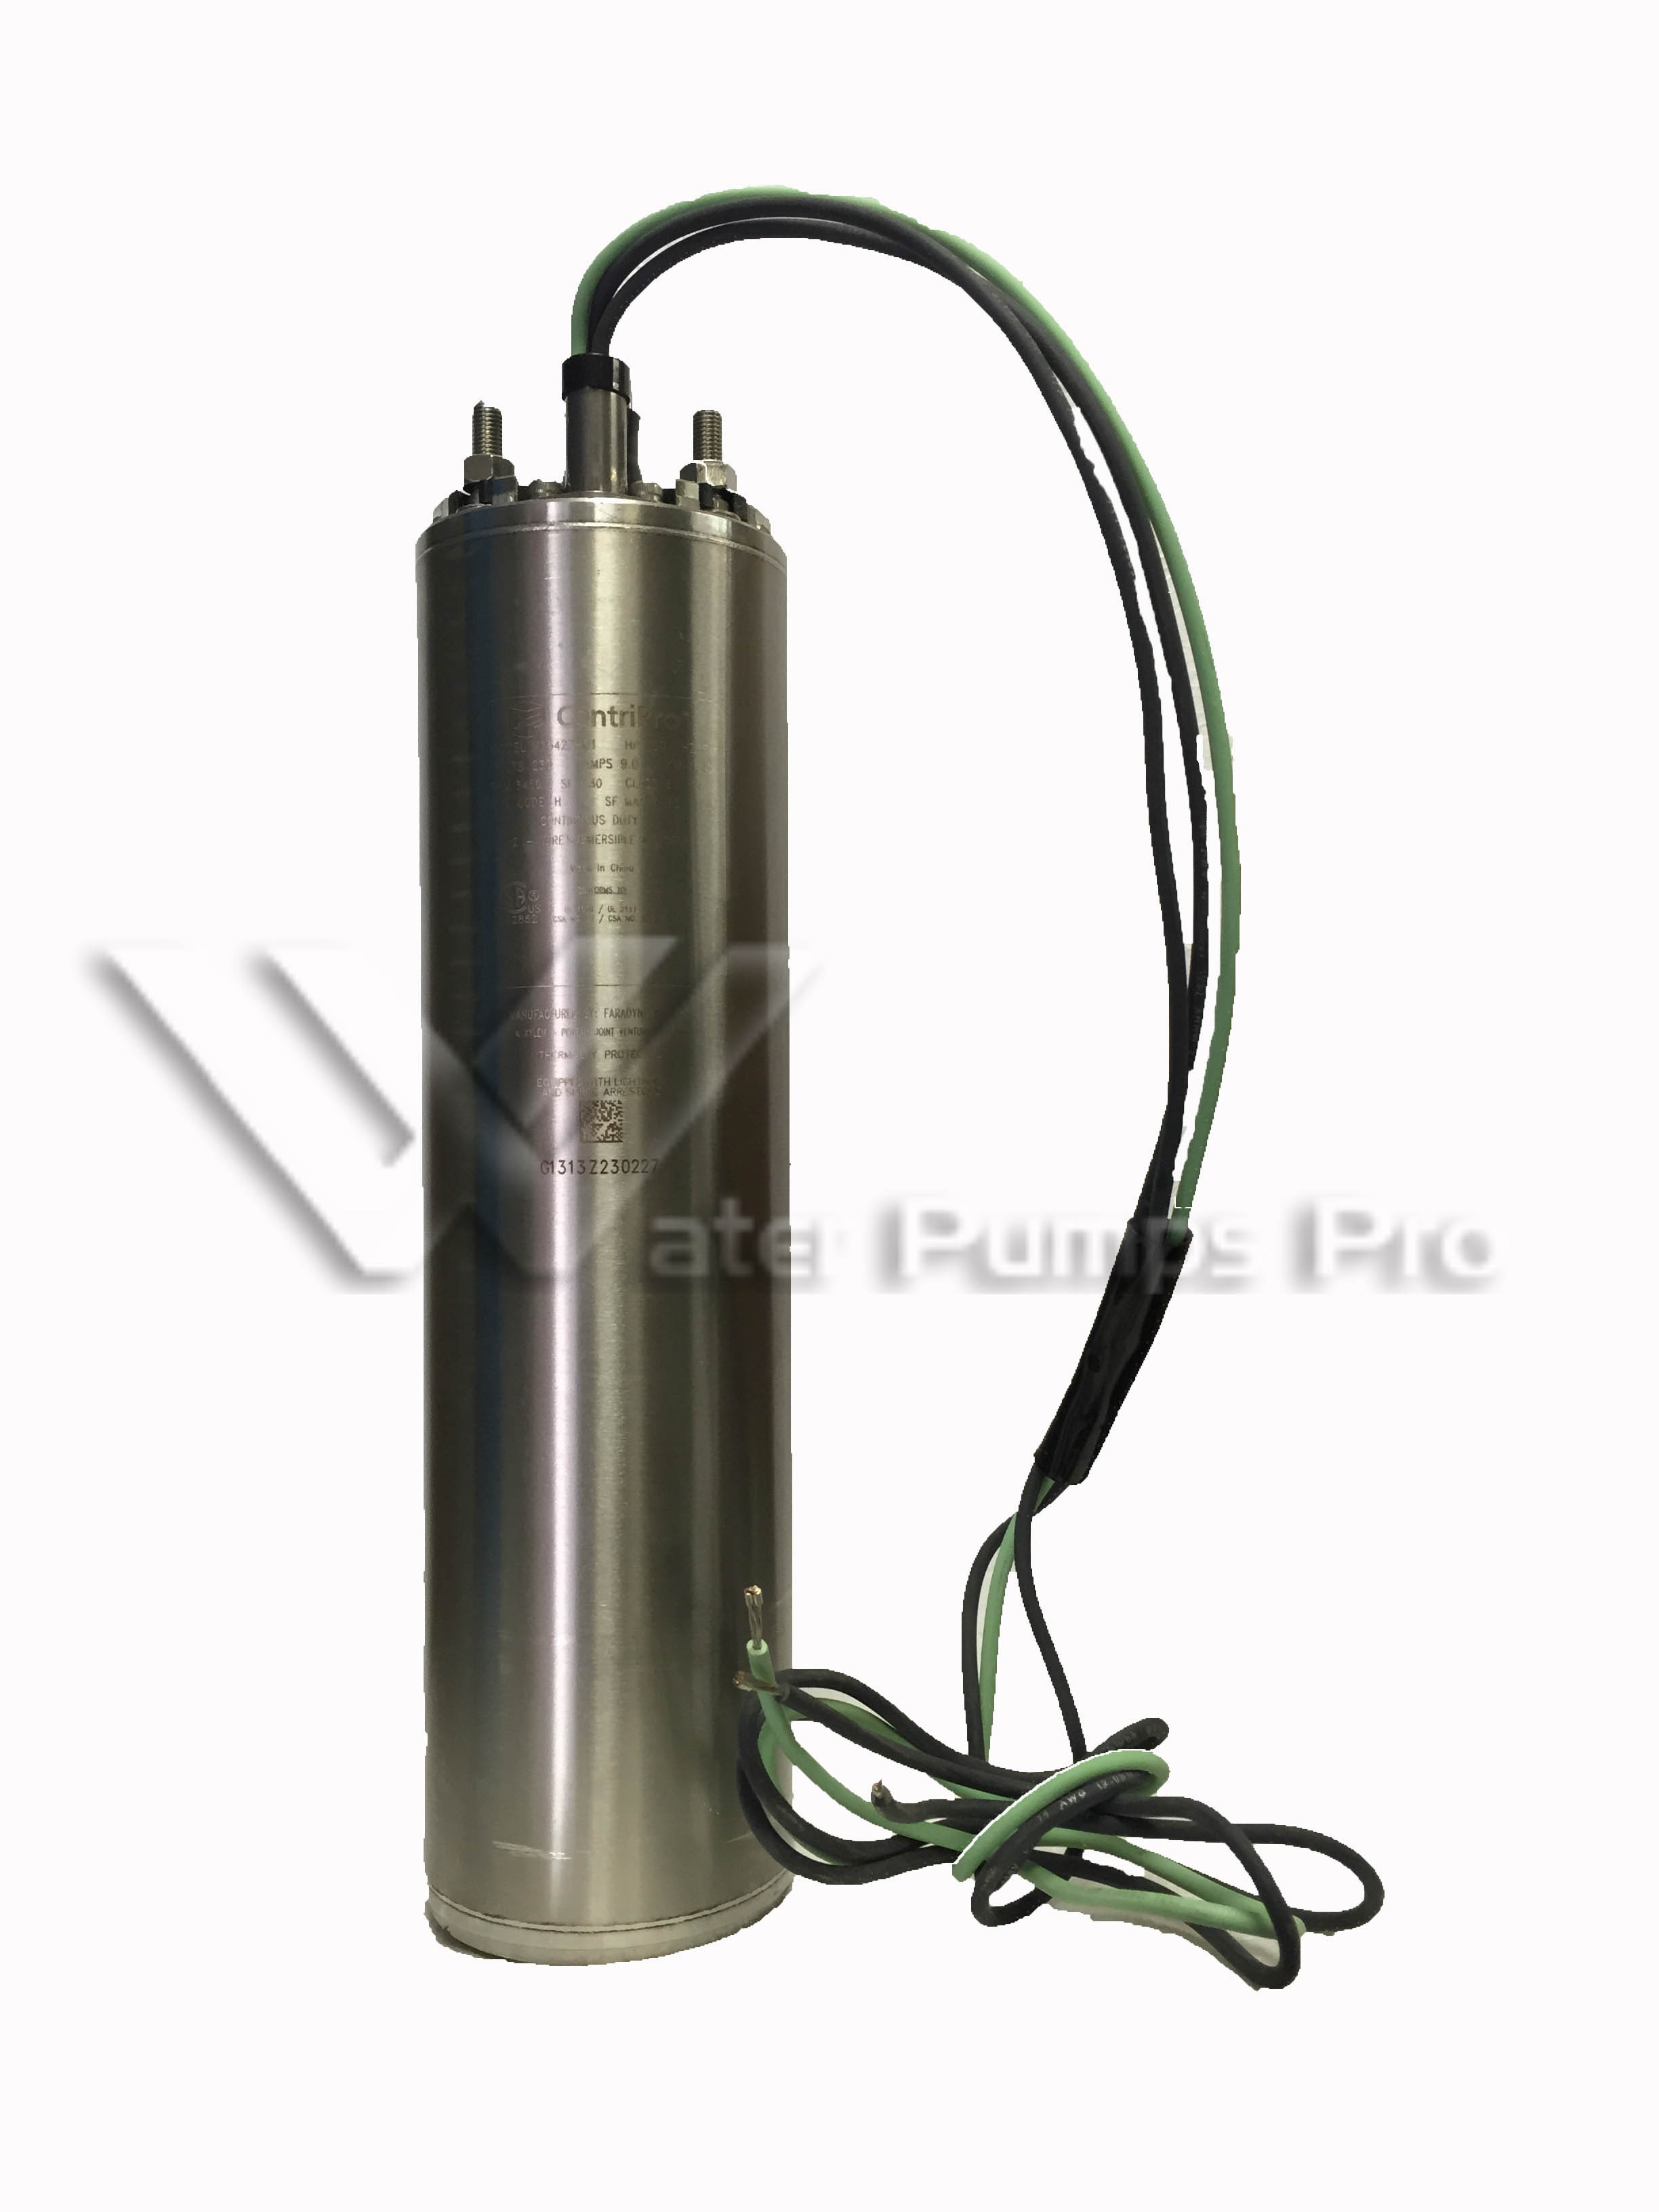 Goulds M05422 1/2HP 4" Submersible Motor 230V 1Phase 2 Wire 60Hz